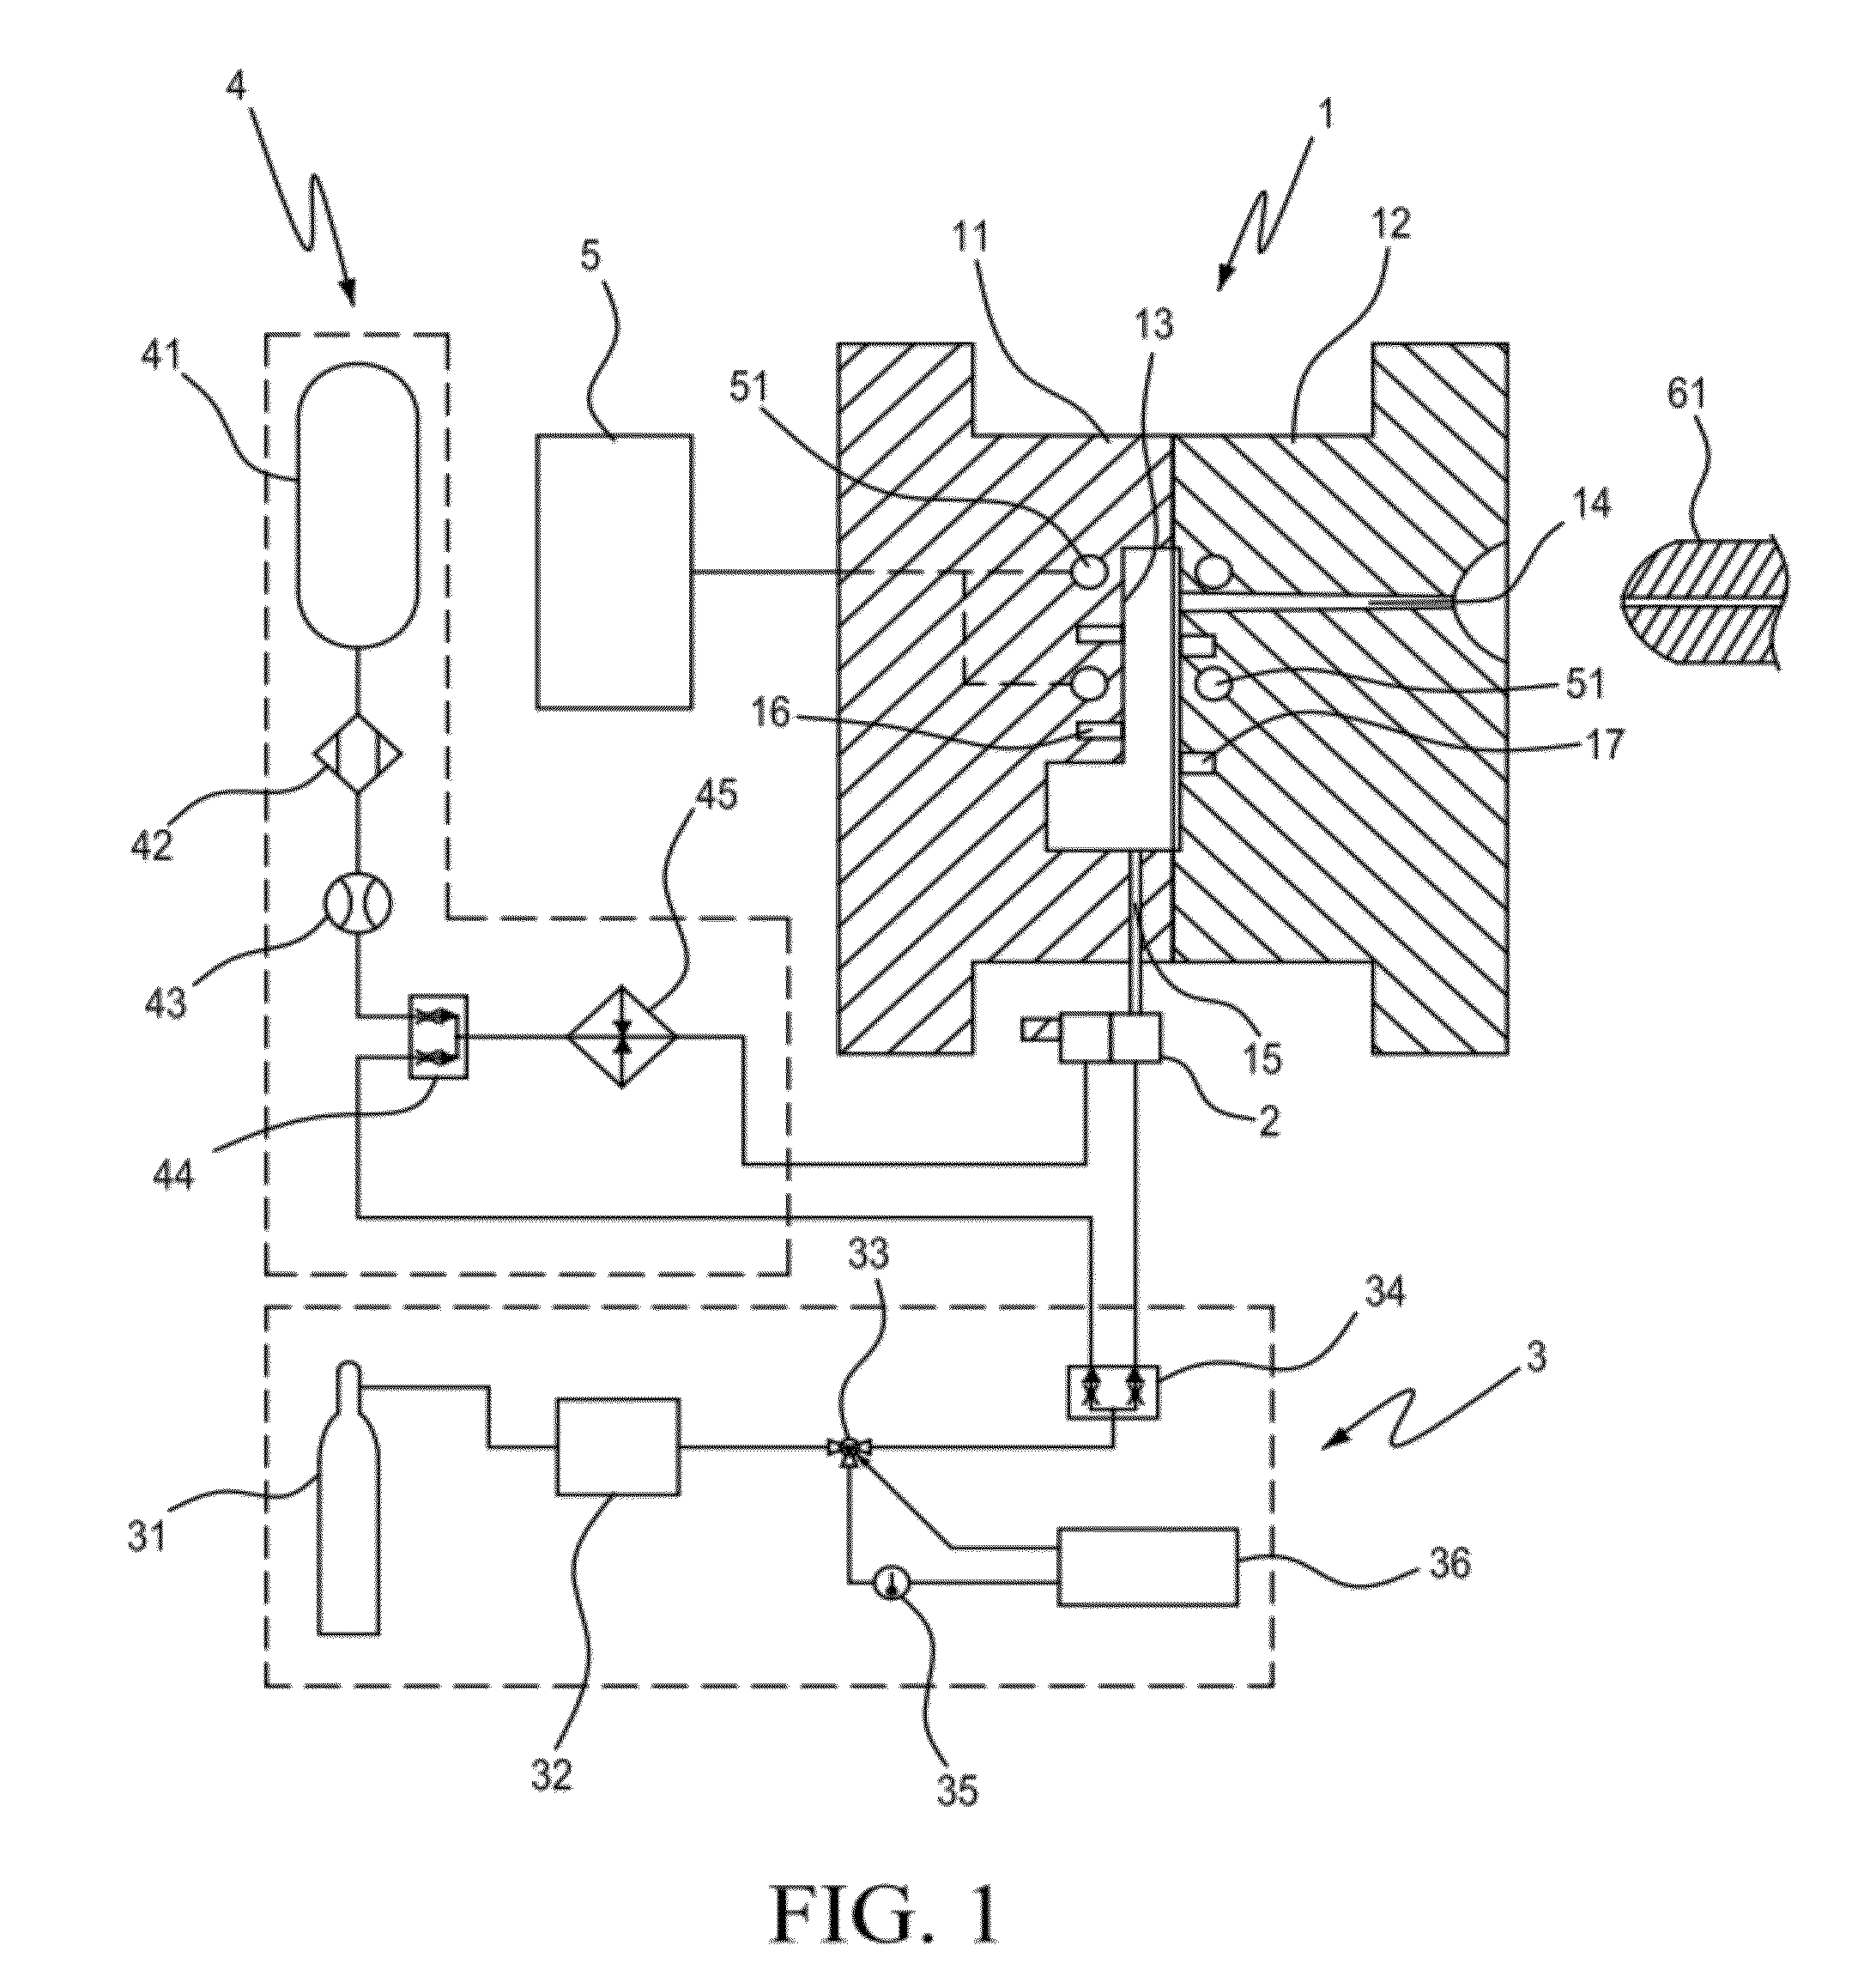 Apparatus for controlling counterpressure and temperature in mold cavity